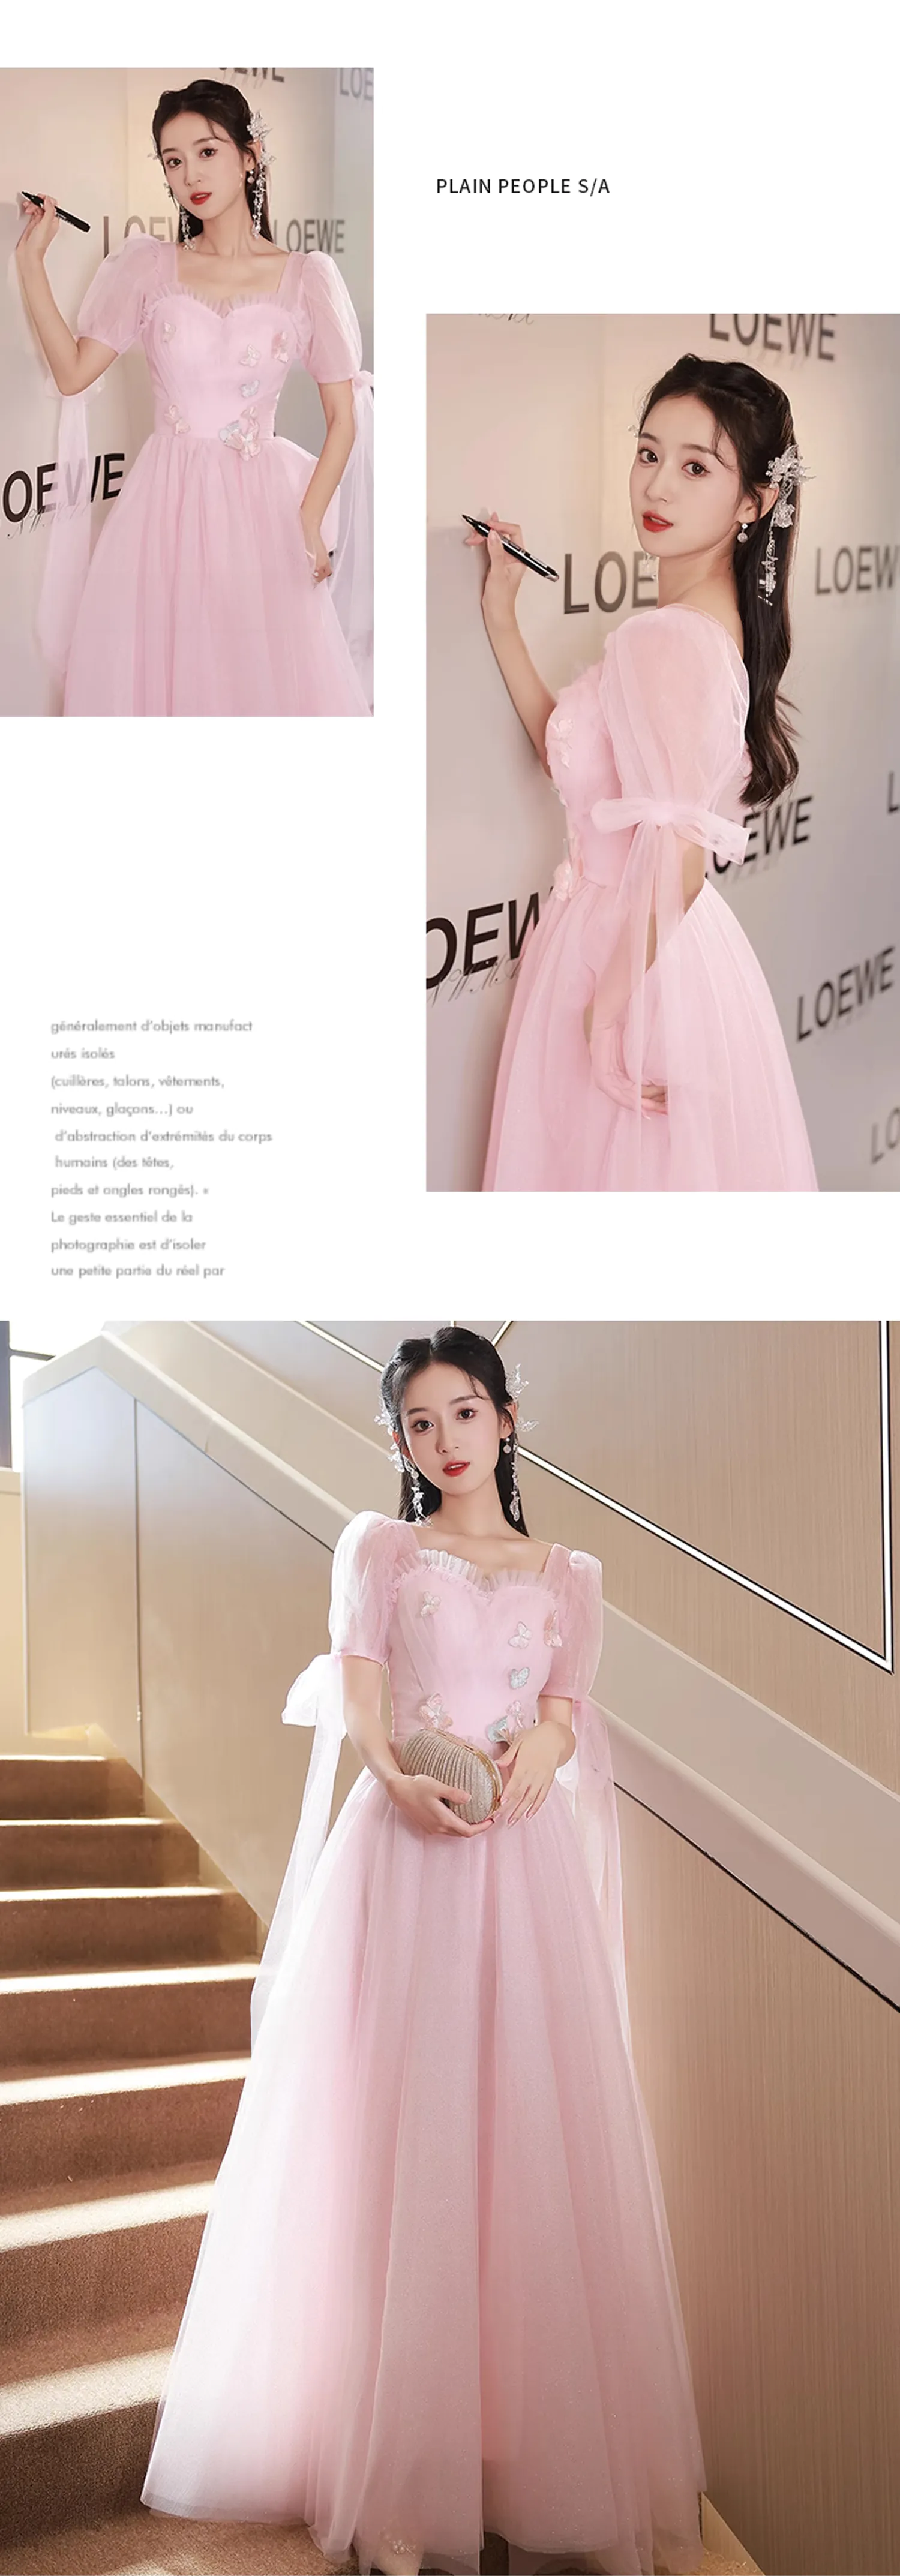 Sweet-Charming-Pink-Tulle-Short-Sleeve-Cocktail-Party-Evening-Dress13